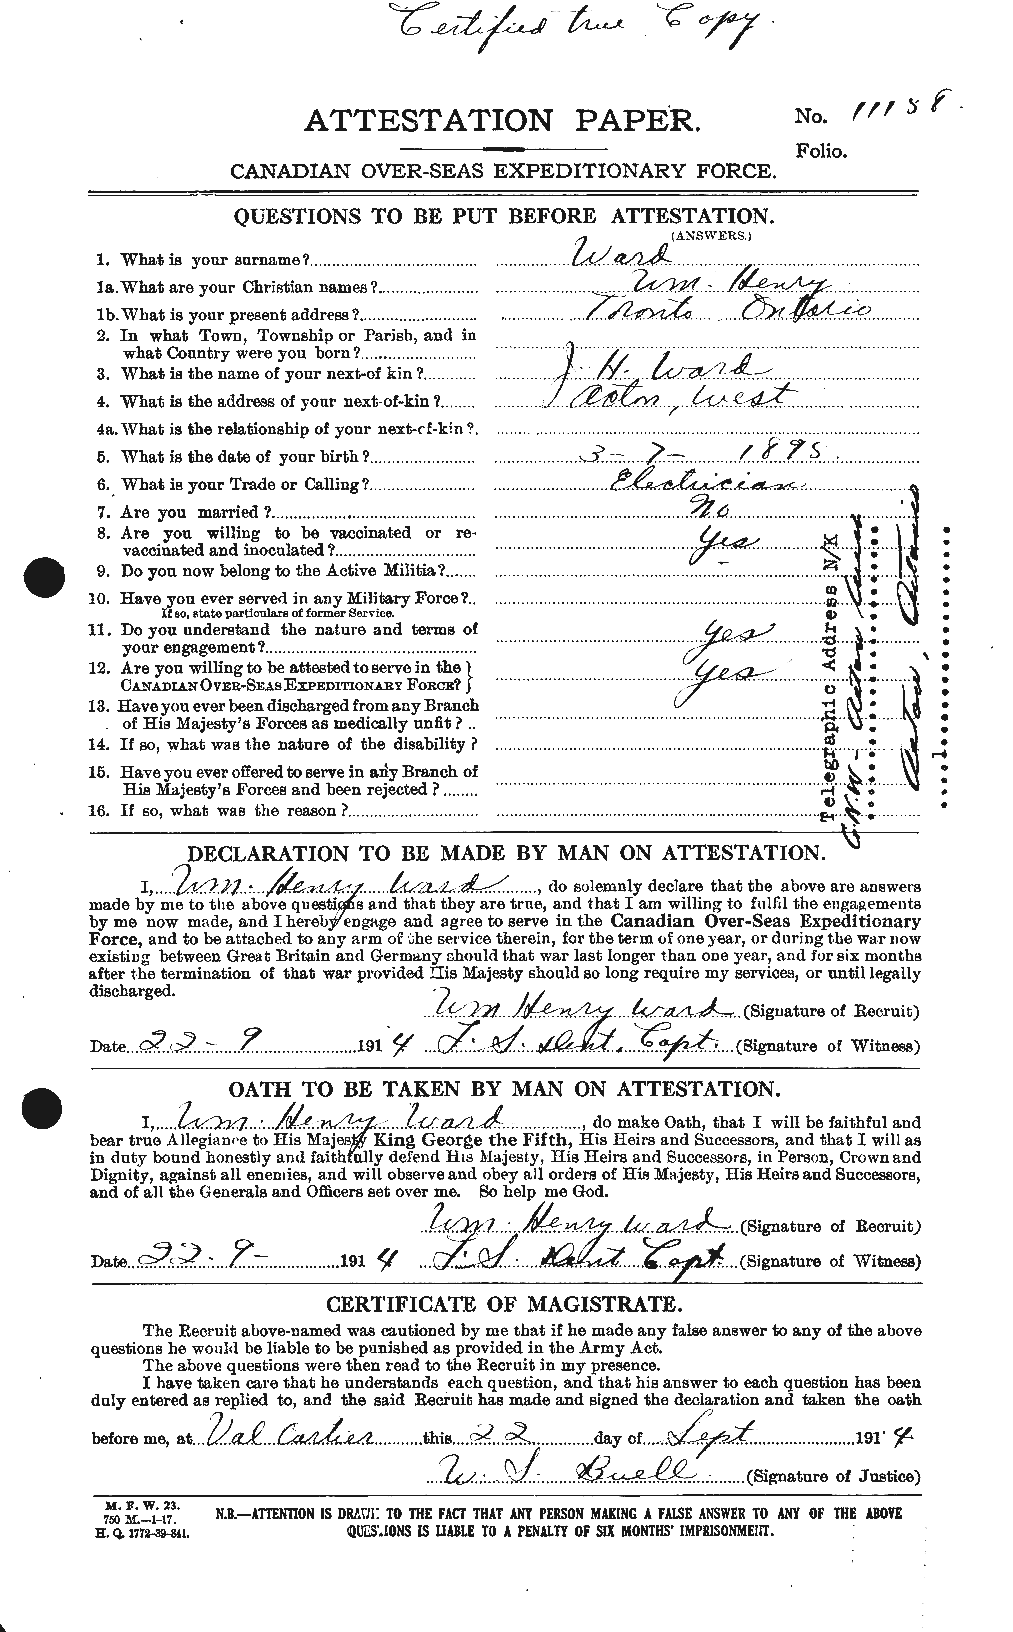 Personnel Records of the First World War - CEF 659826a